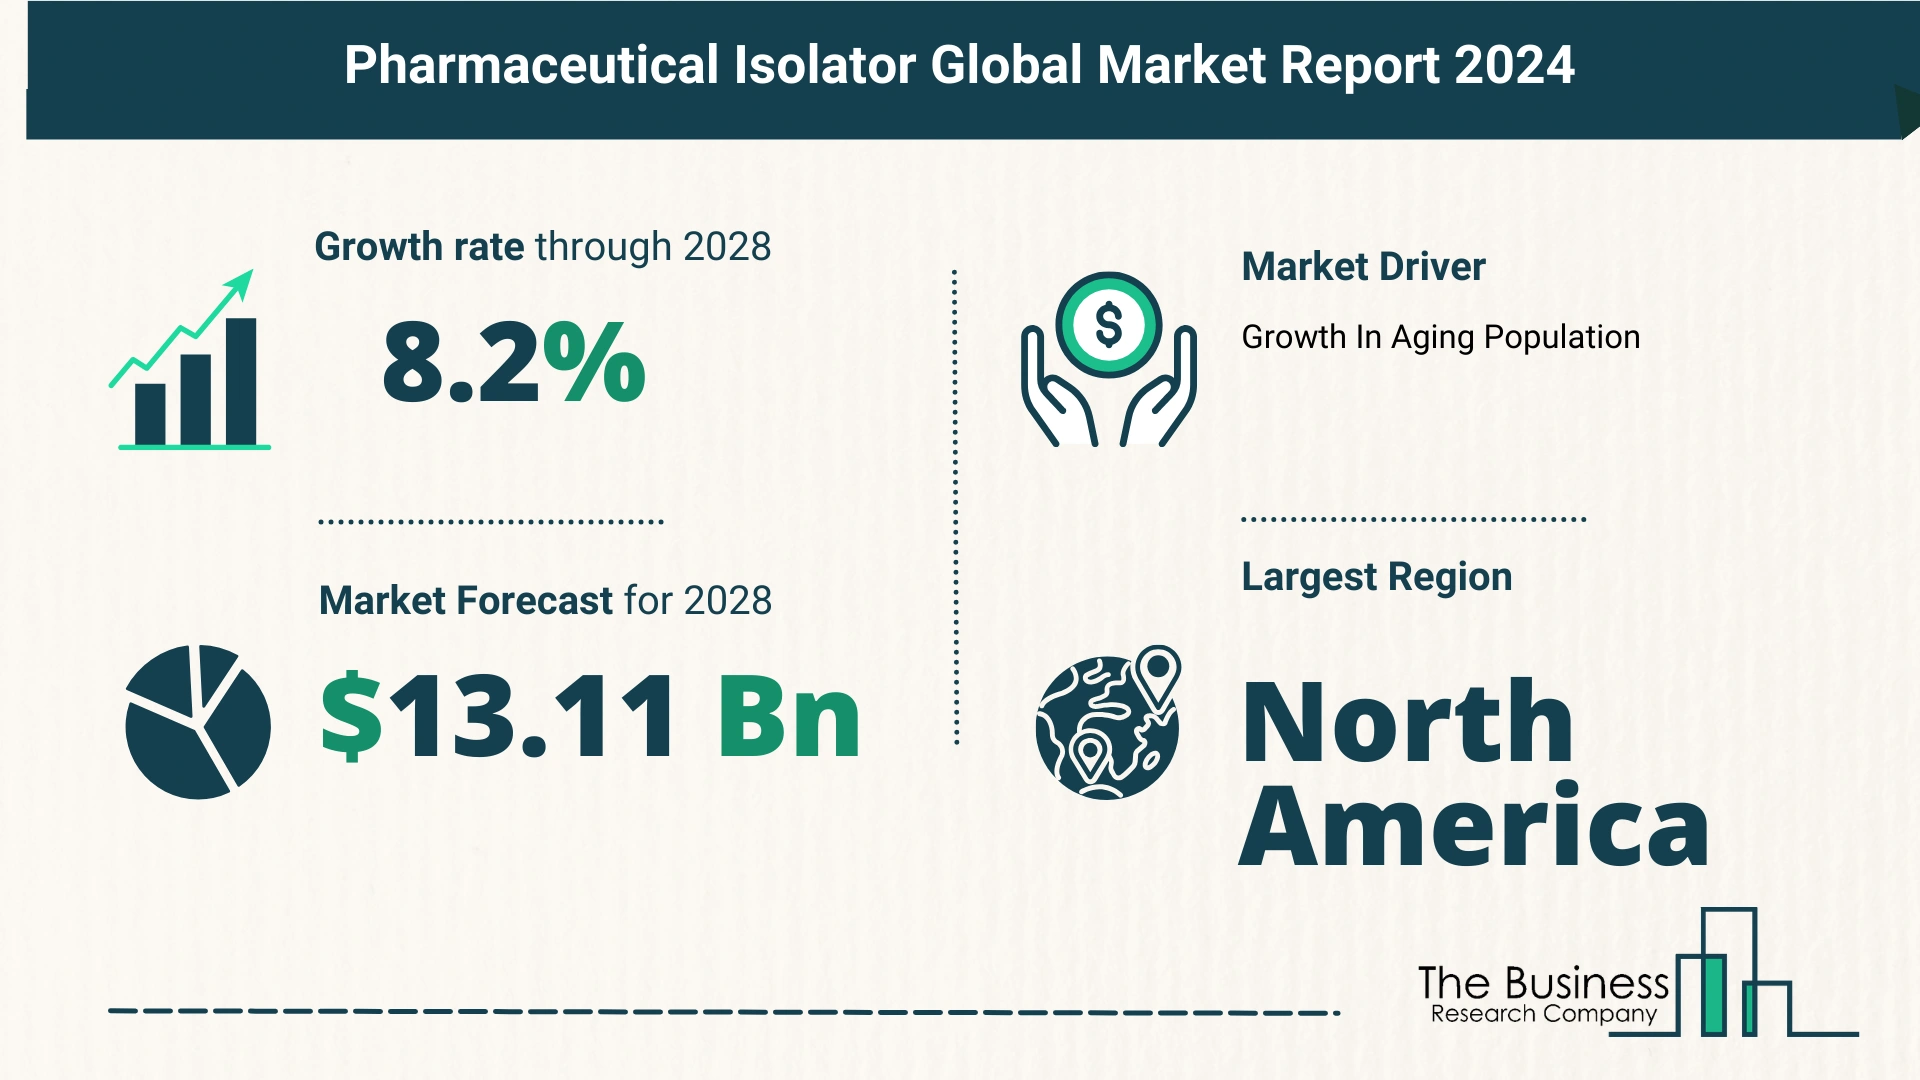 Global Pharmaceutical Isolator Market Report 2024 – Top Market Trends And Opportunities